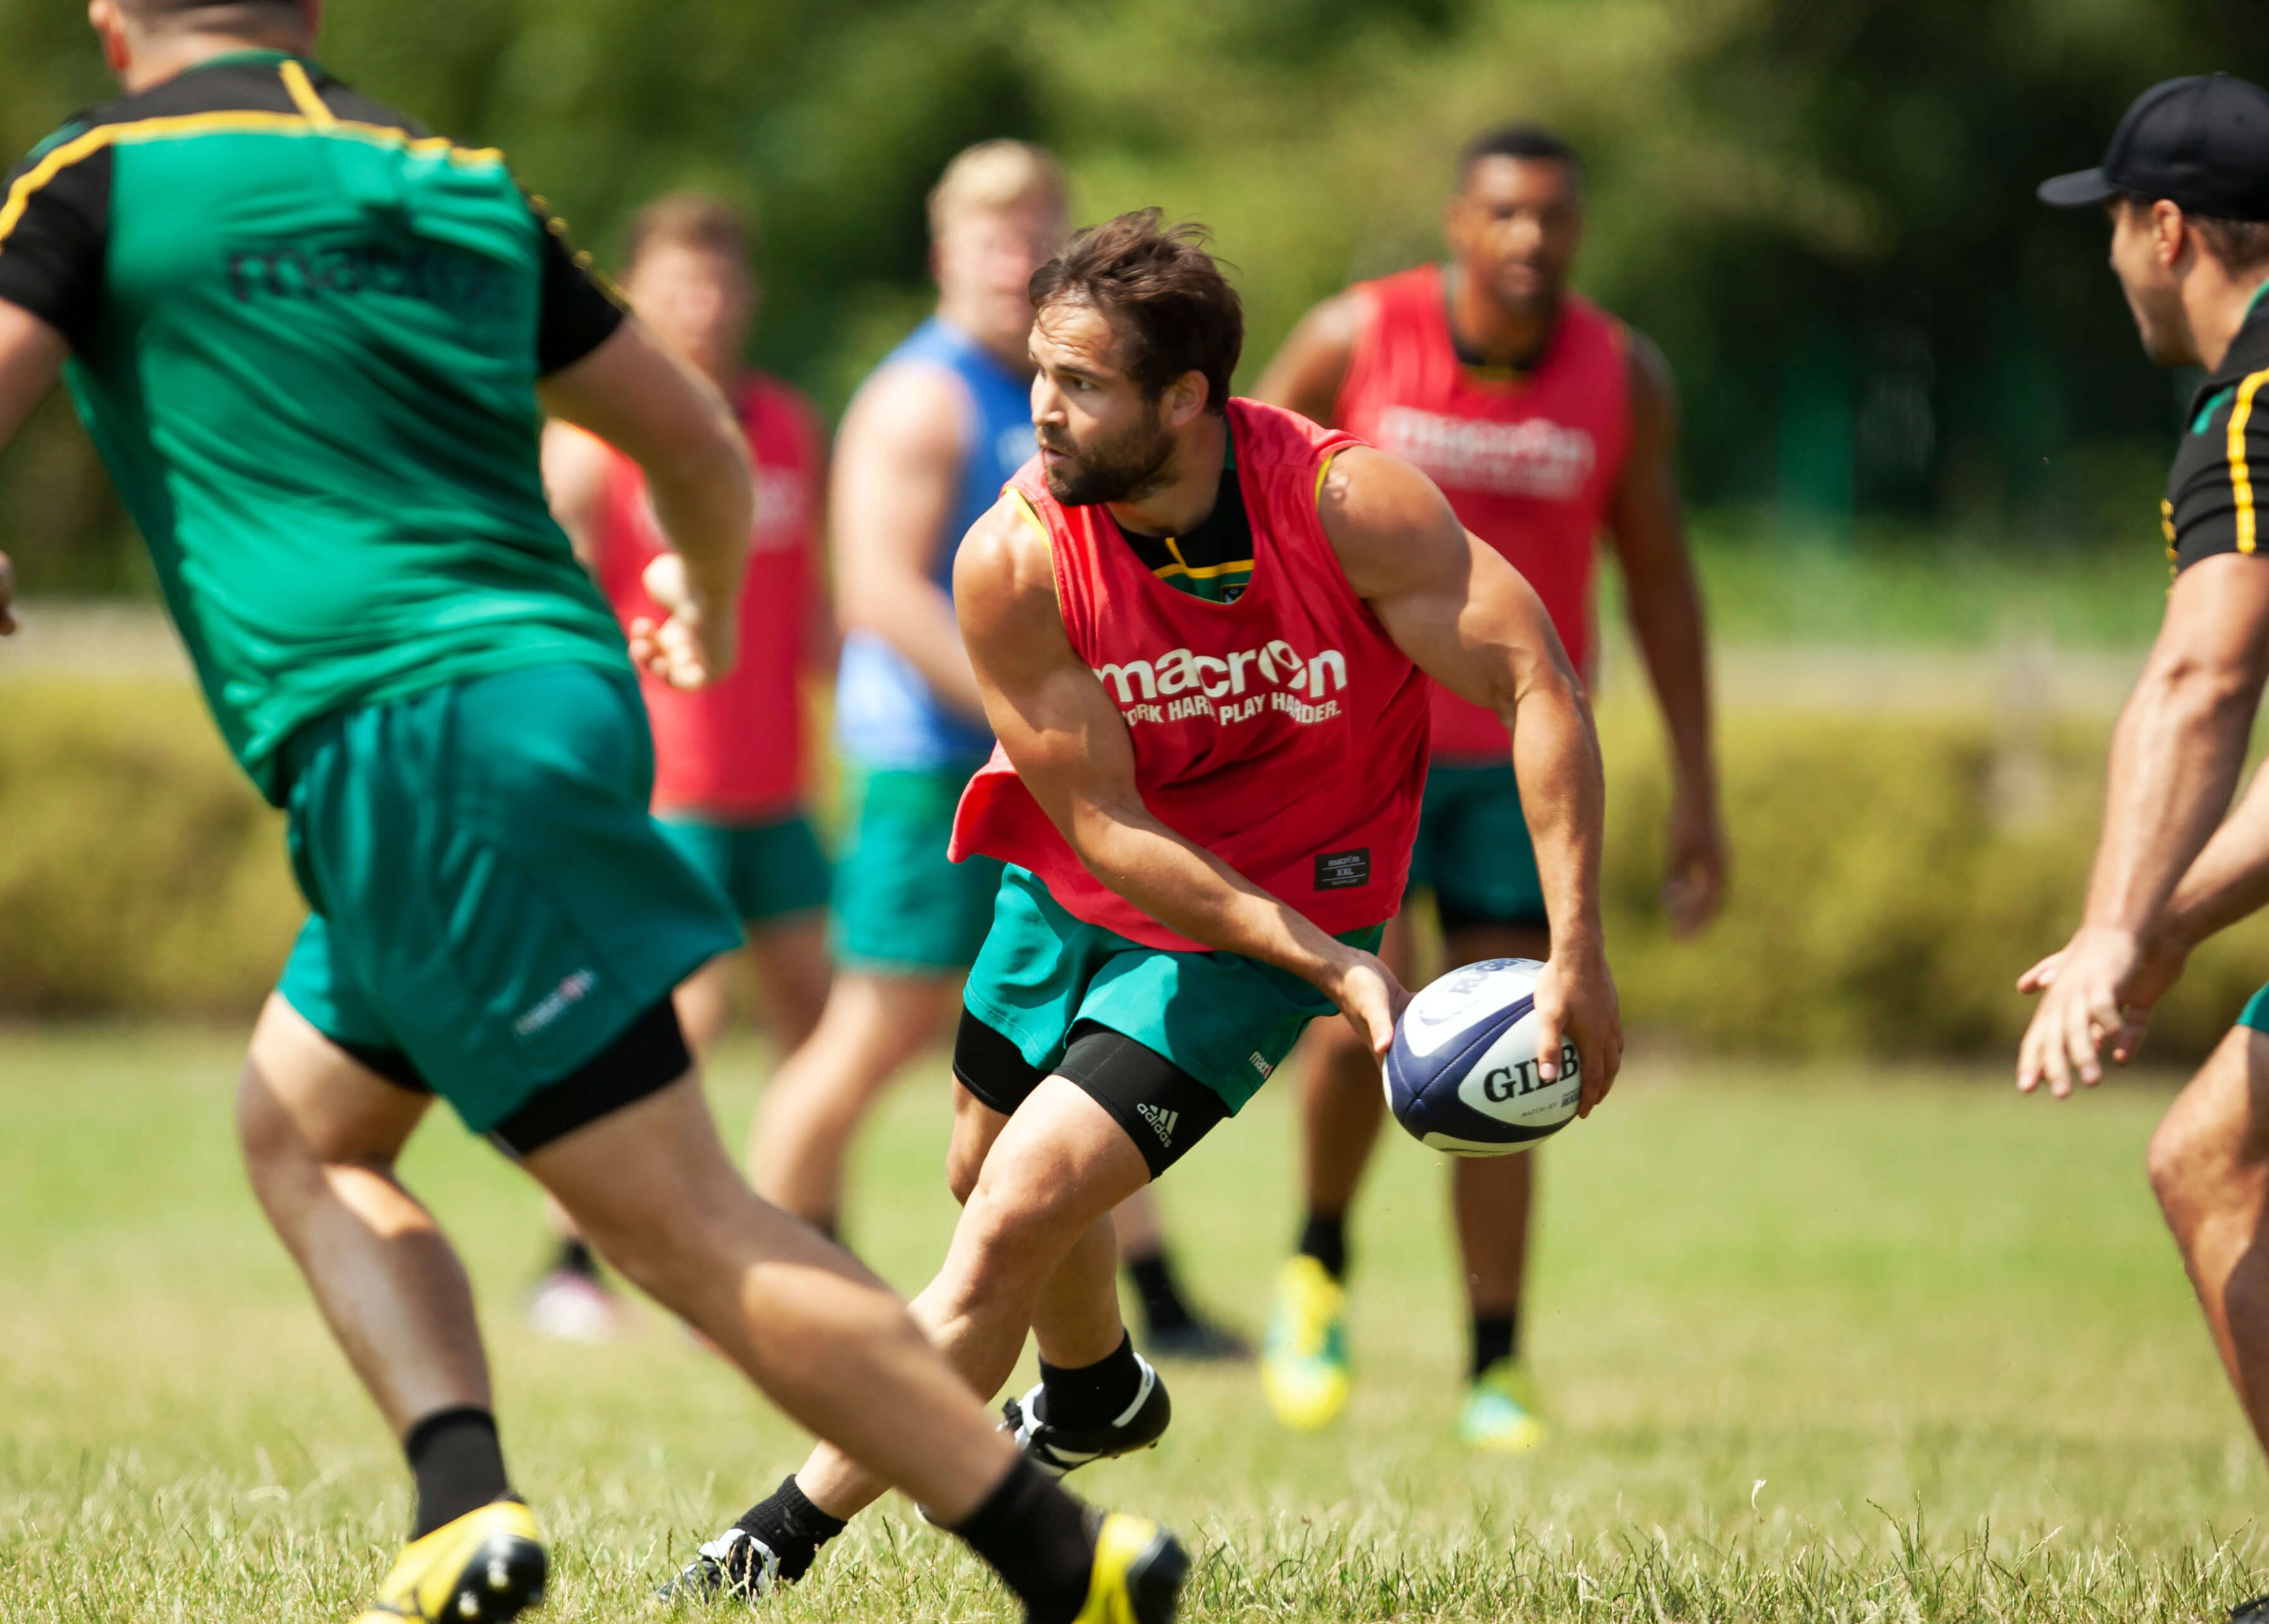 Rugby-tour-camp-portugal-spain-italy-sports-ventures